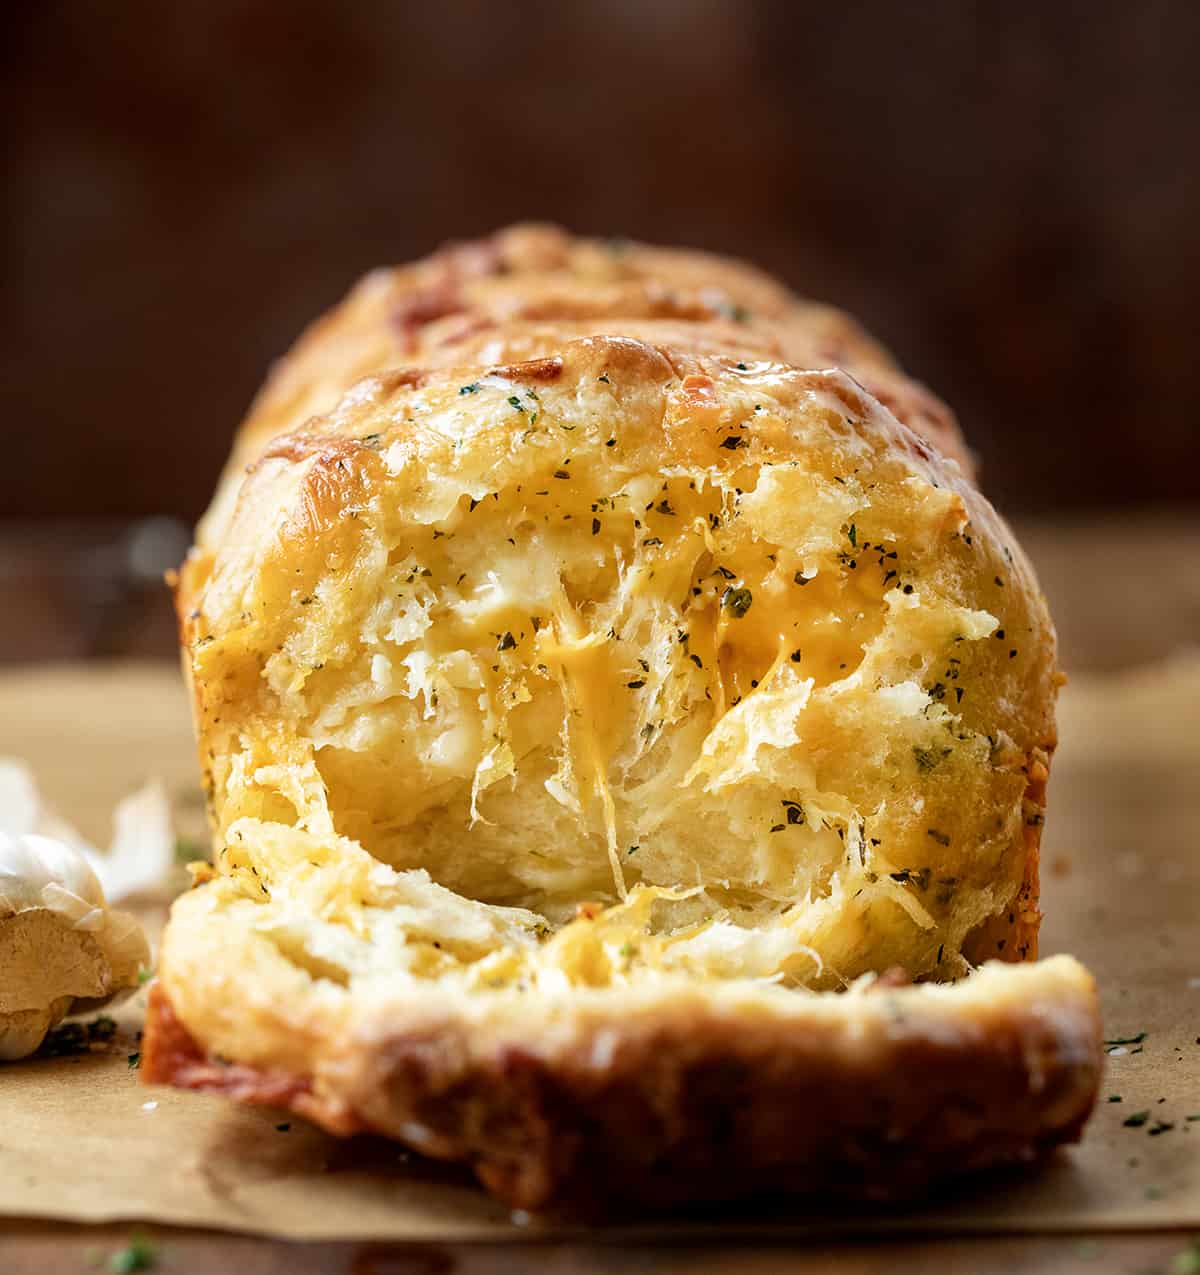 Loaf of From Scratch Cheesy Garlic Pull-Apart Bread with some pieces removed showing inside cheesy tender bread.